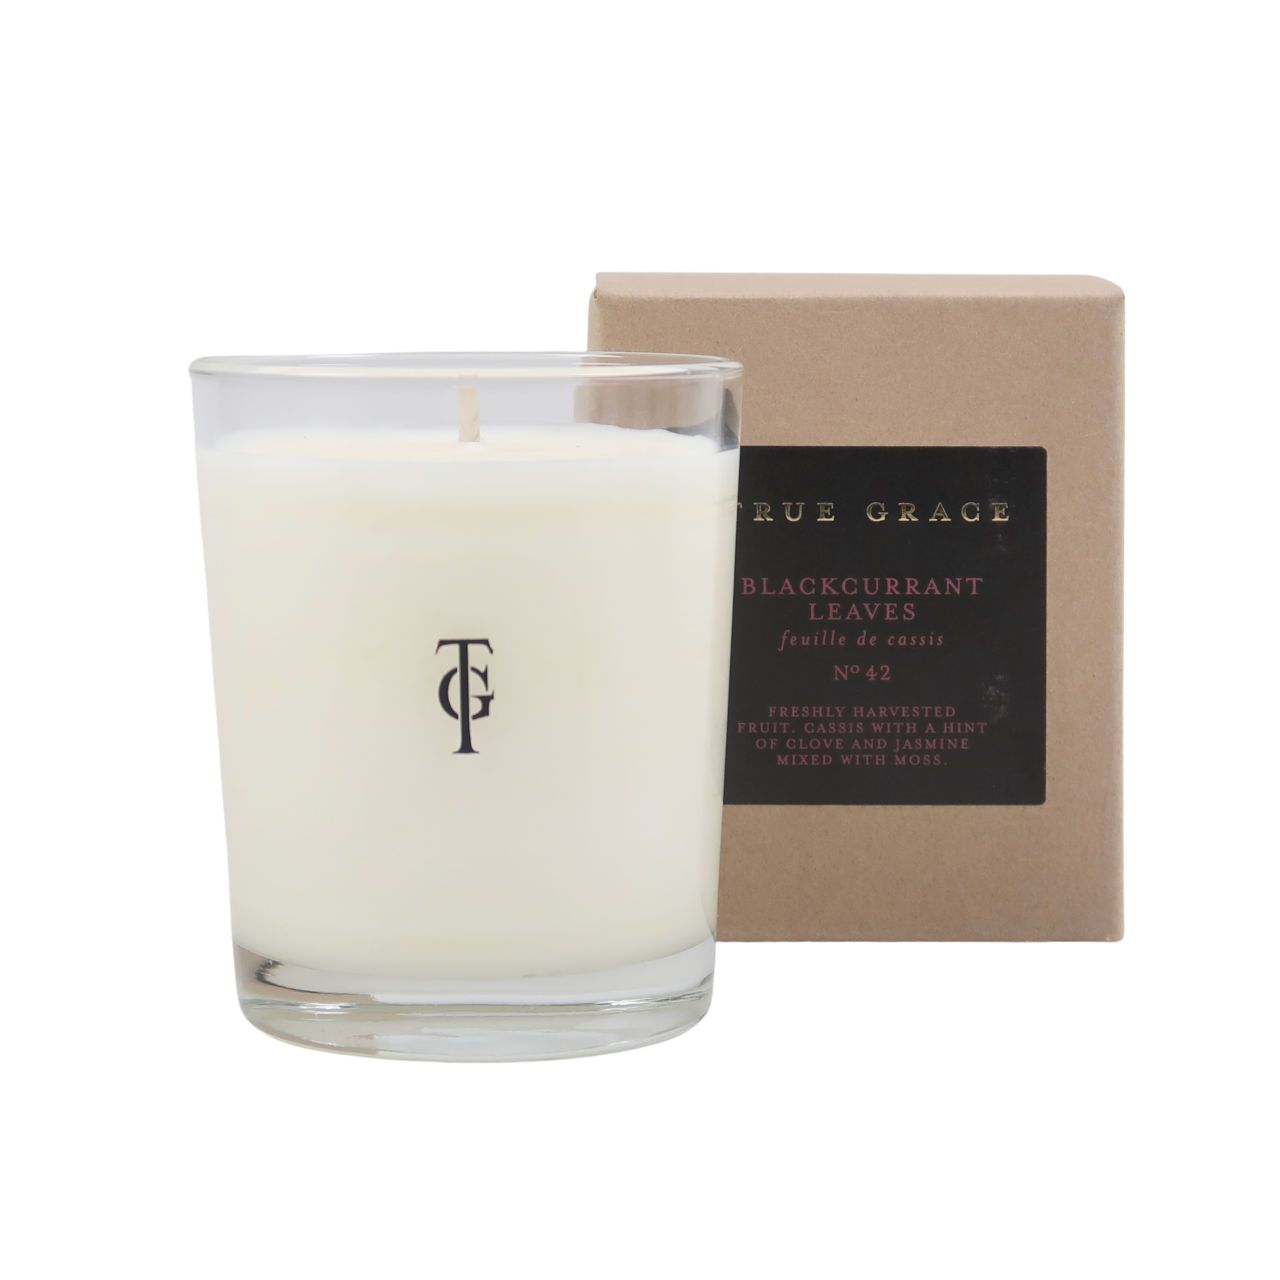 True Grace Blackcurrant Leaves Scented Candle by True Grace